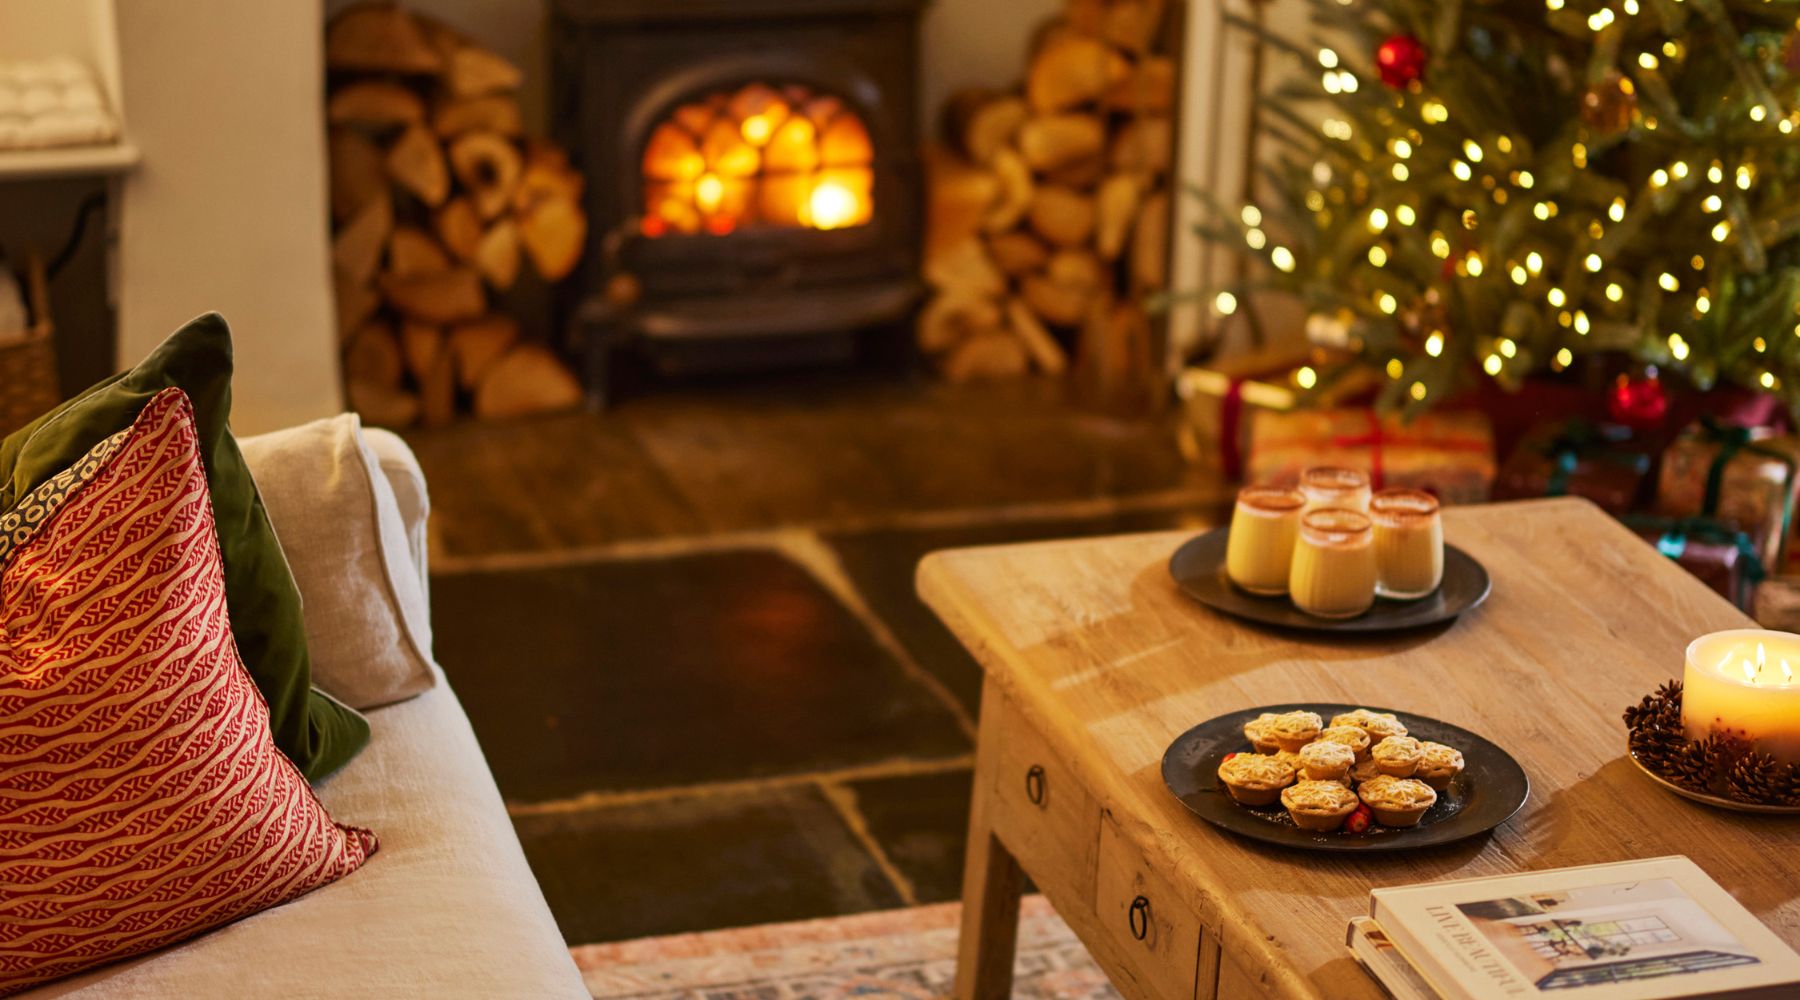 Omaze Million Pound House Lake District  - Glasses of Eggnog on the table by the log burning stove and Chistmas tree  